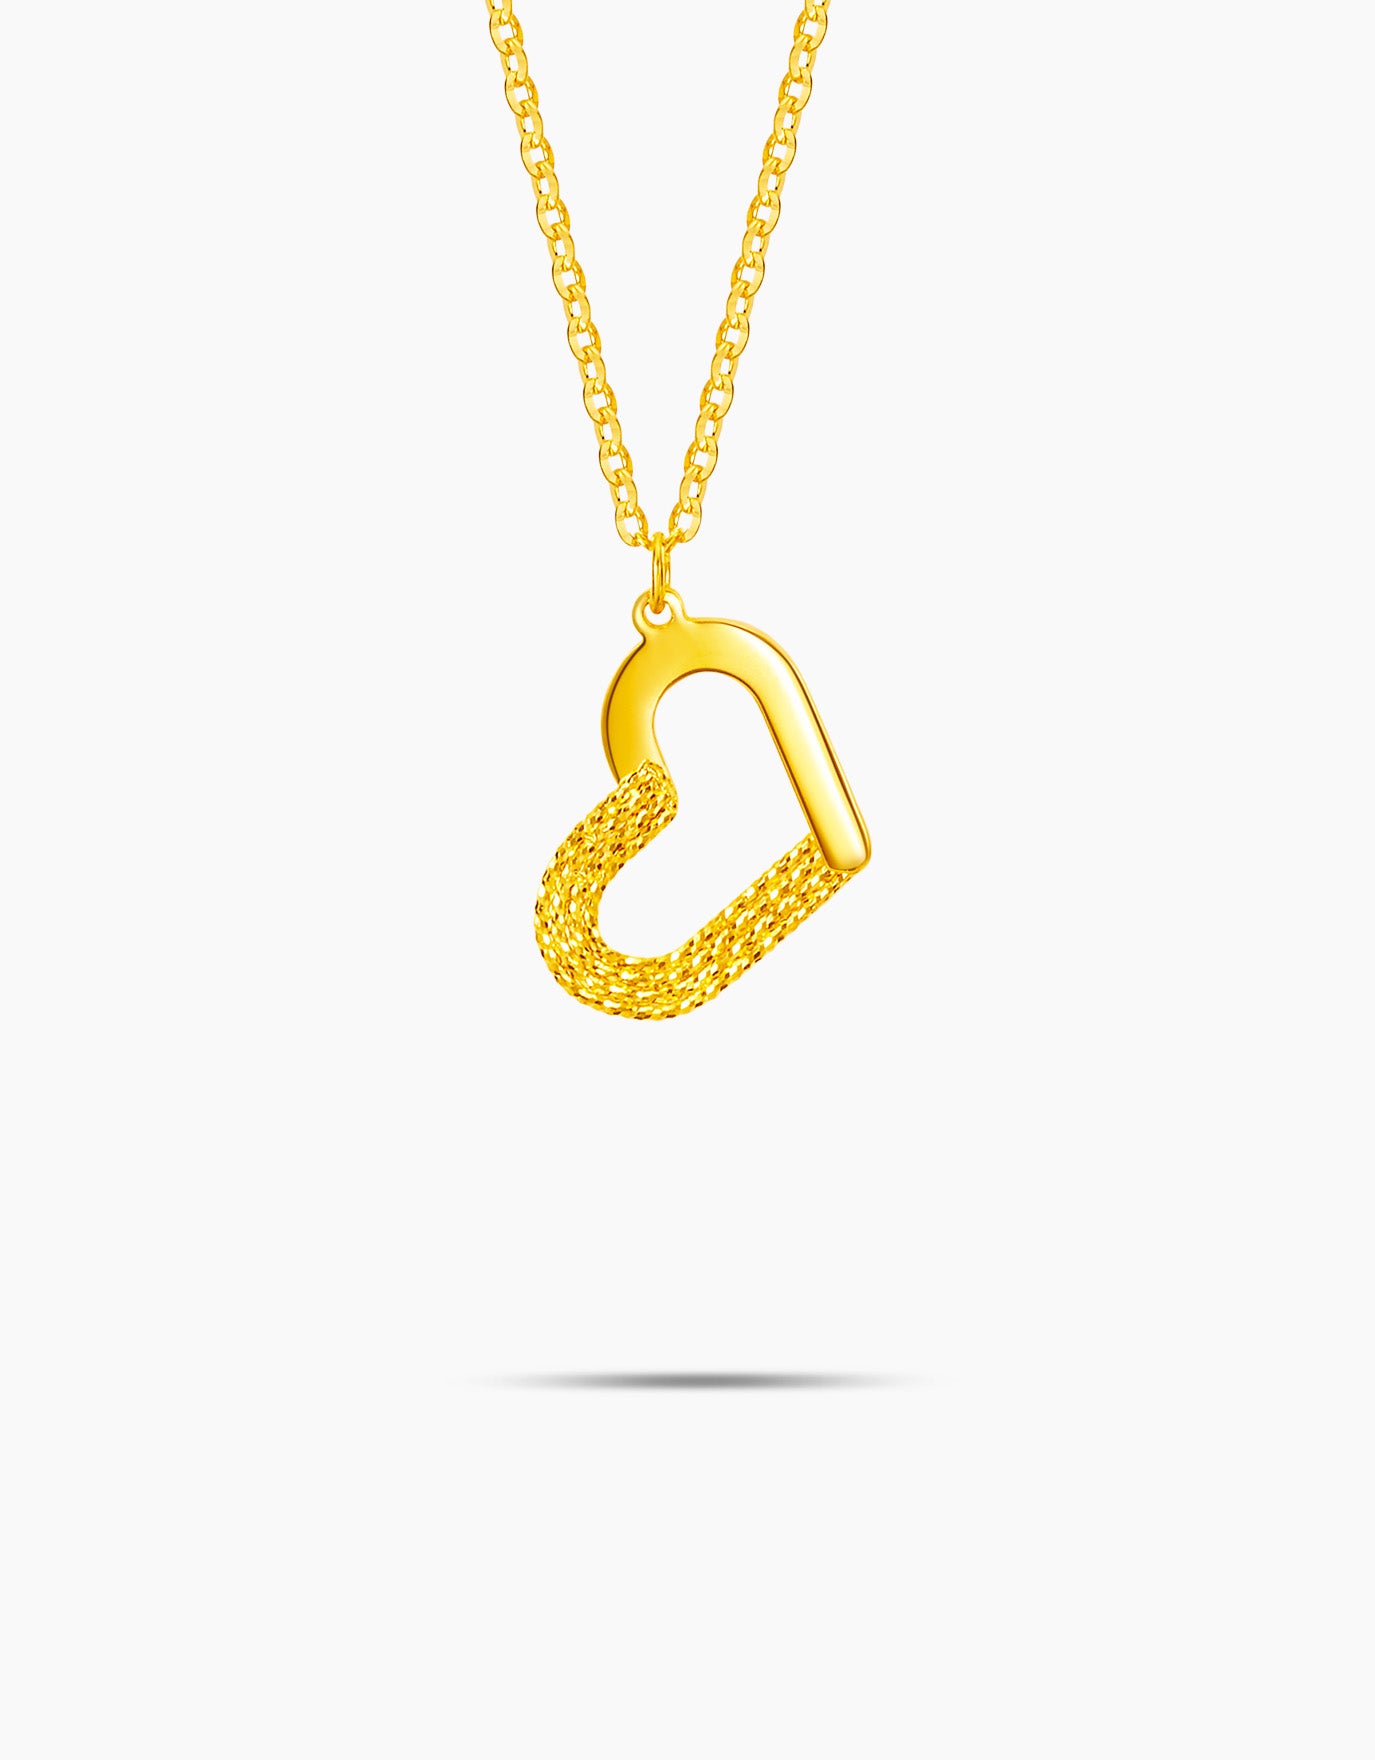 LVC 9IN Tender Heart 999 Gold Necklace